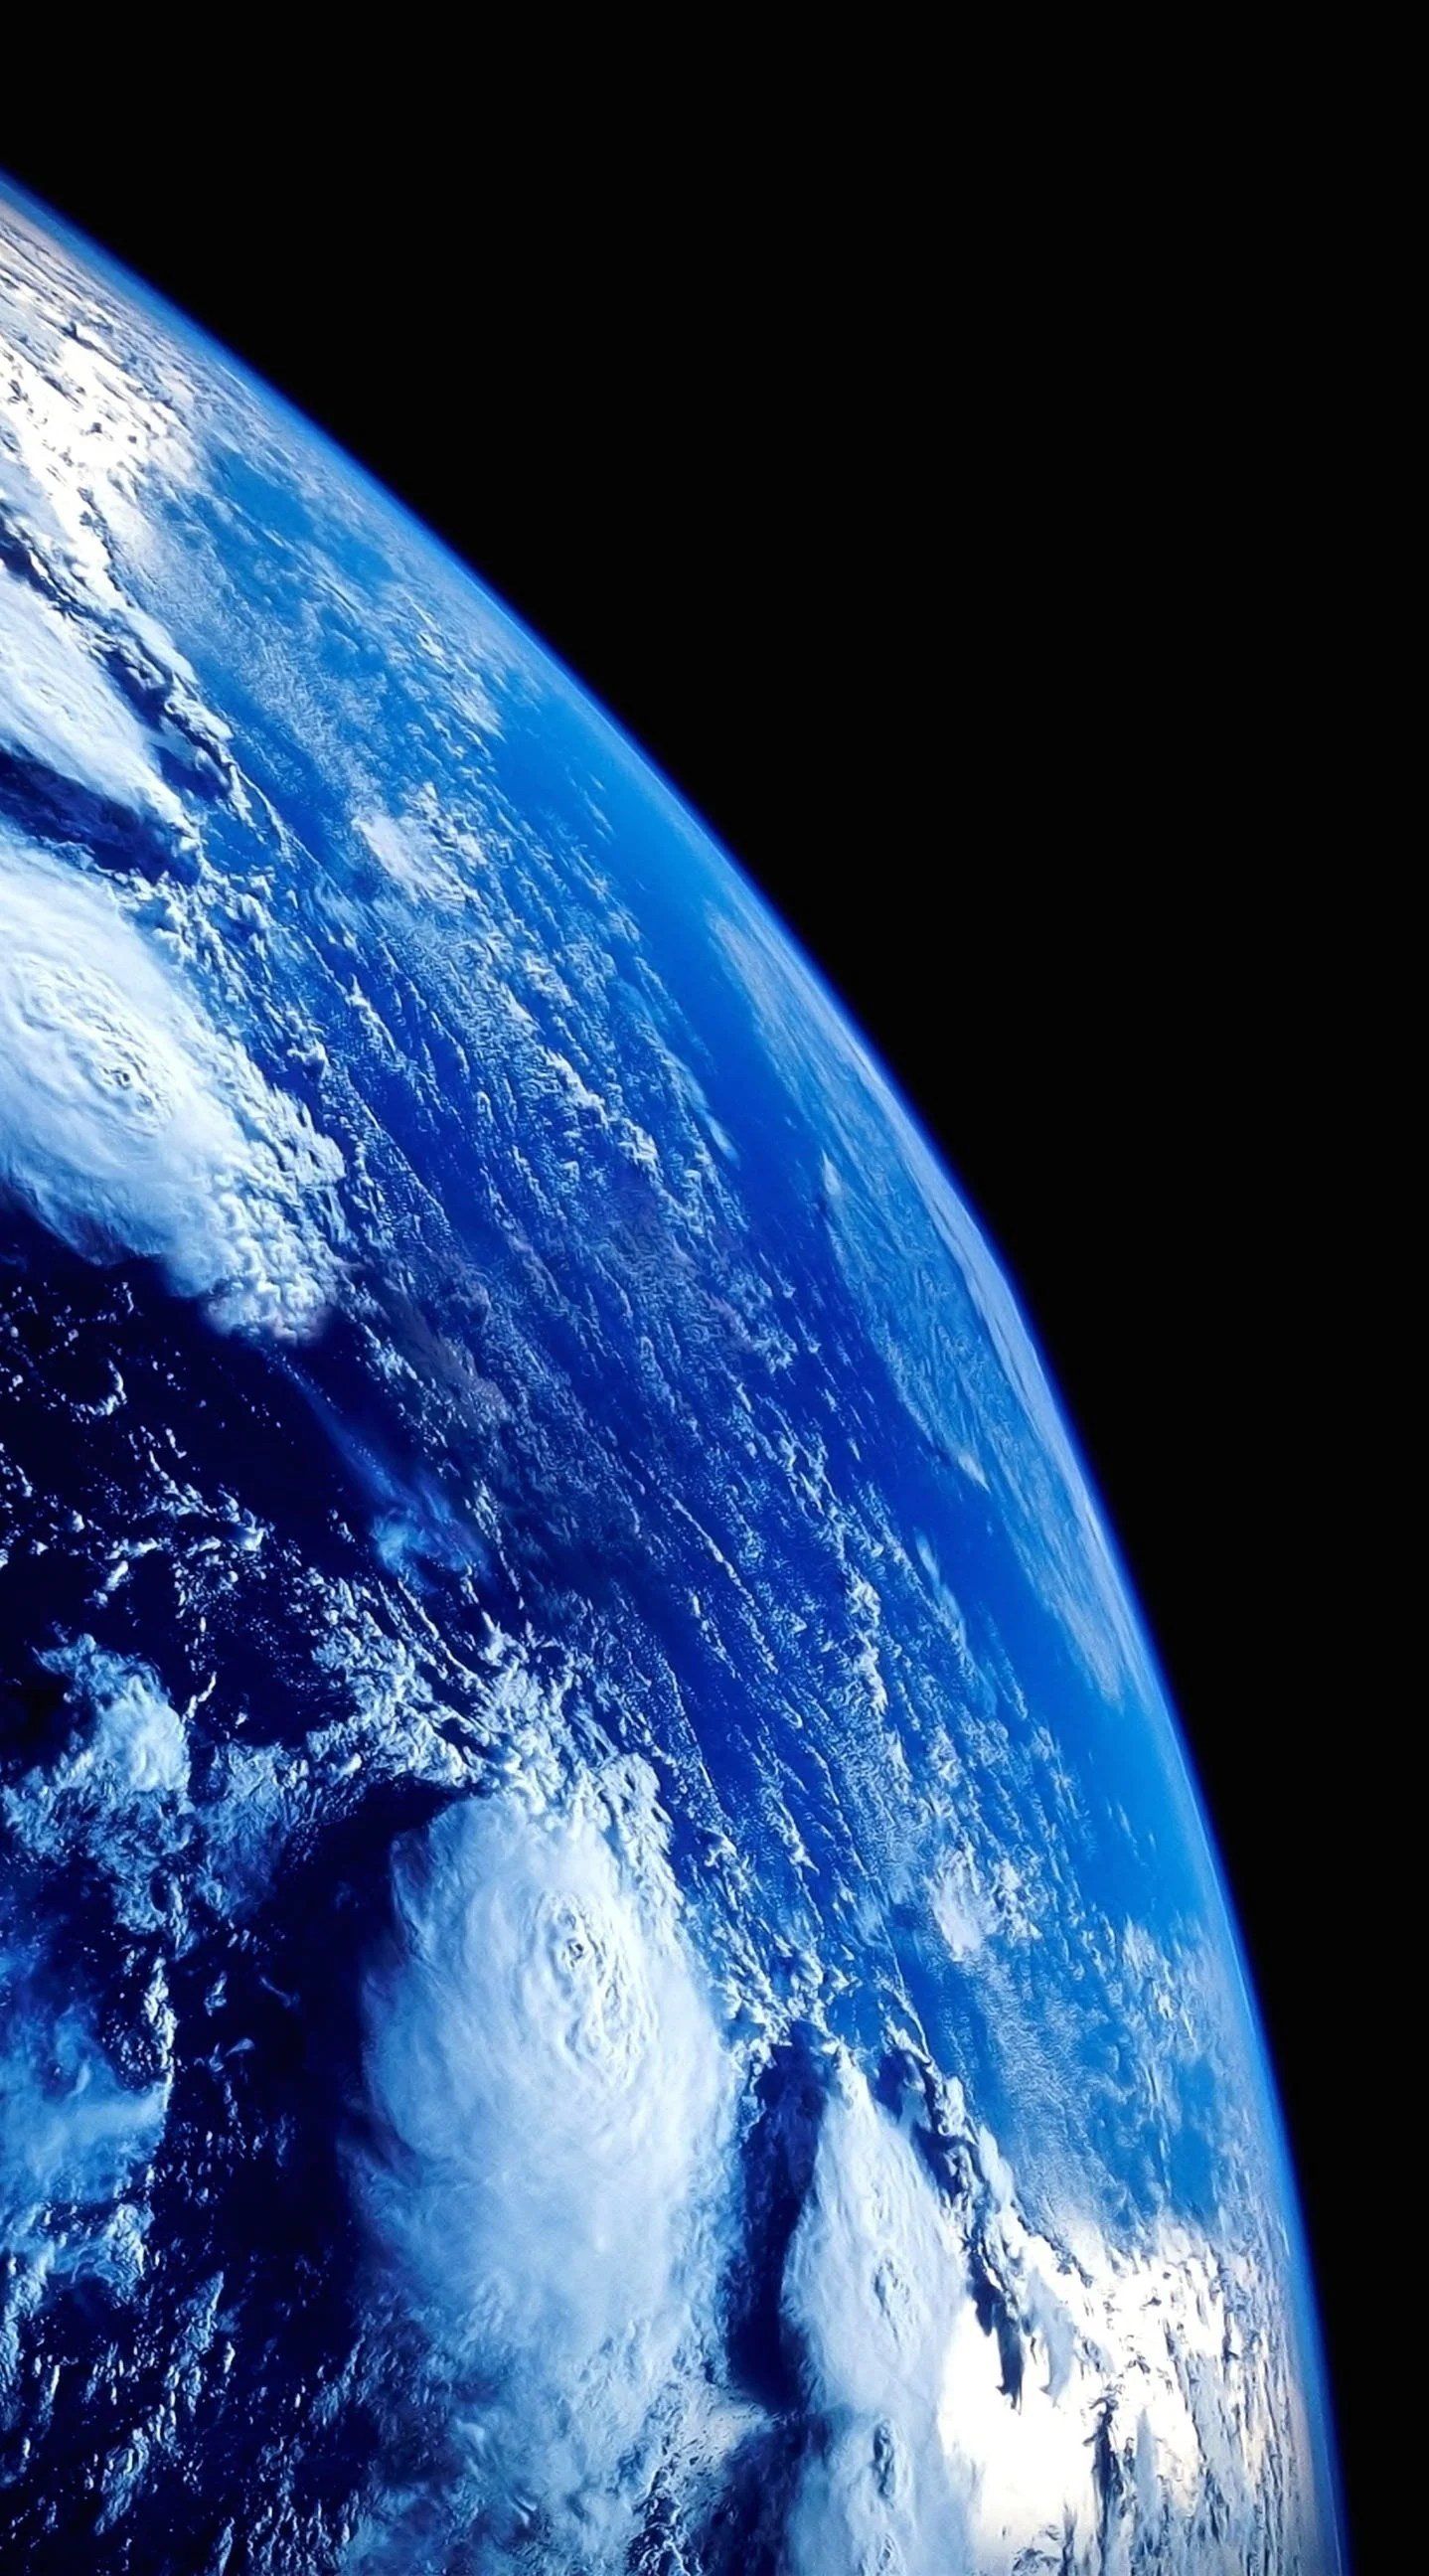 The Earth, taken from space, with a black background - Earth